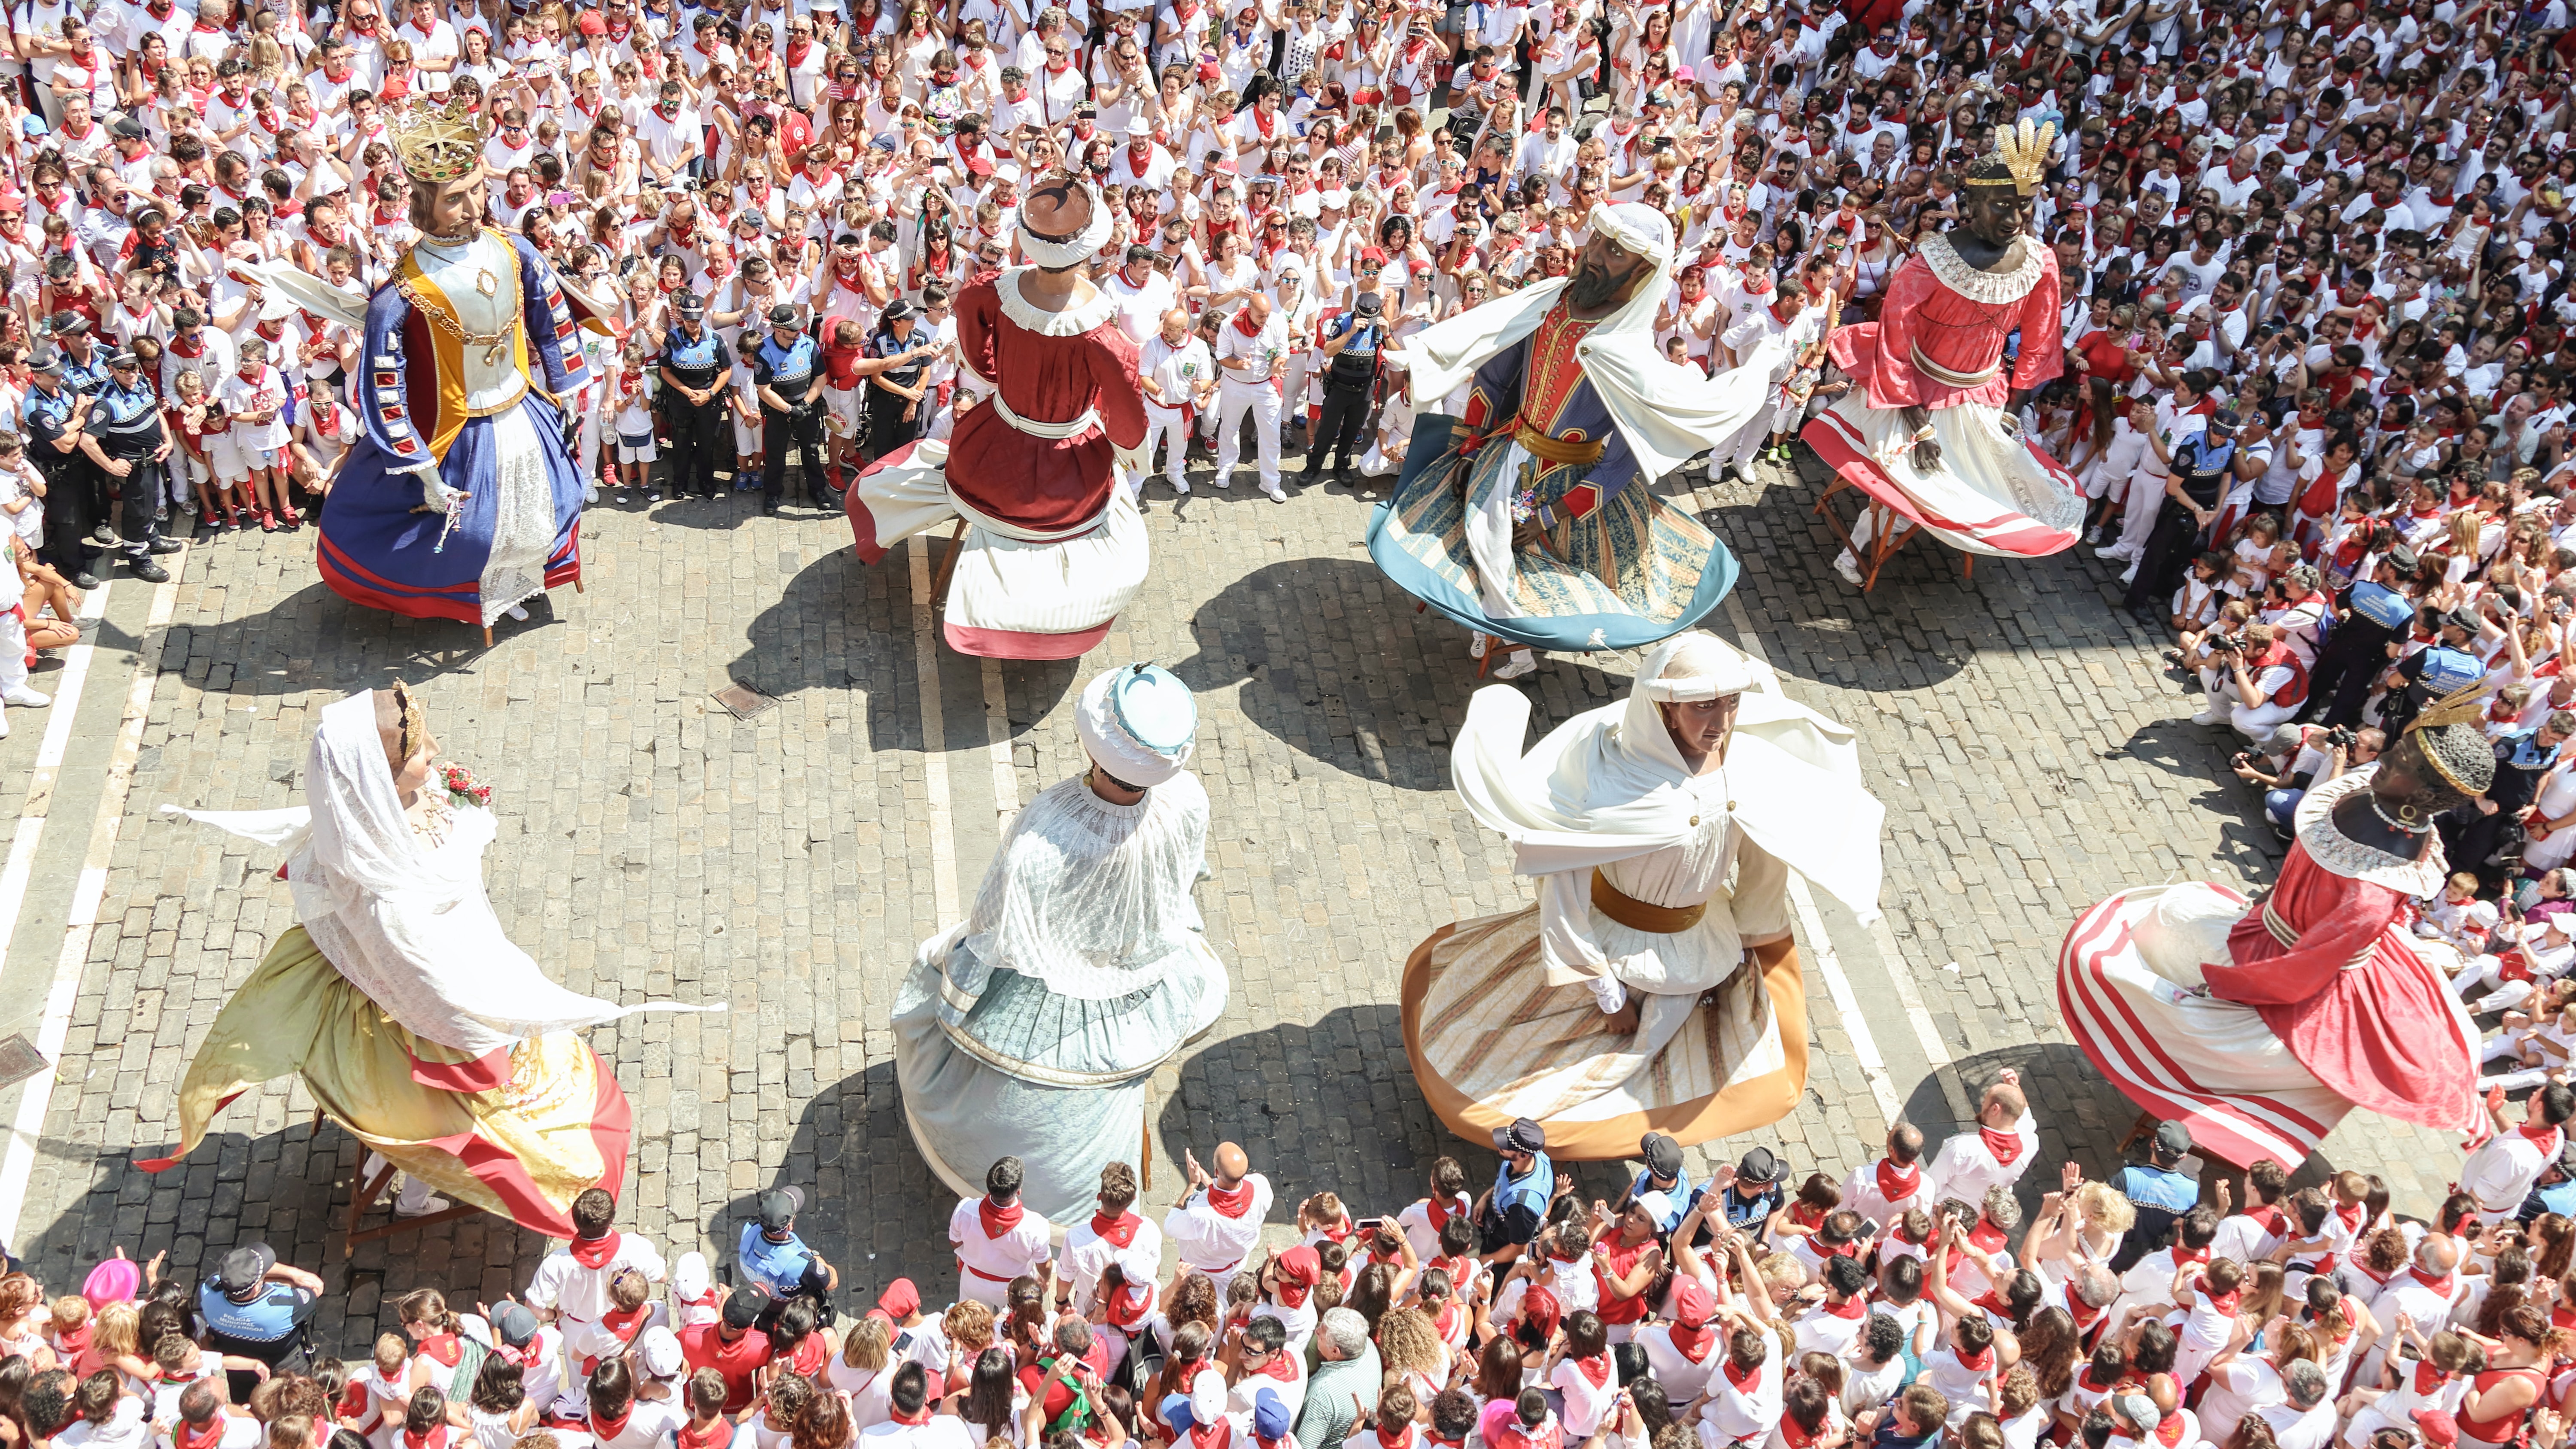 Giant dolls dancing with spectators in a festival